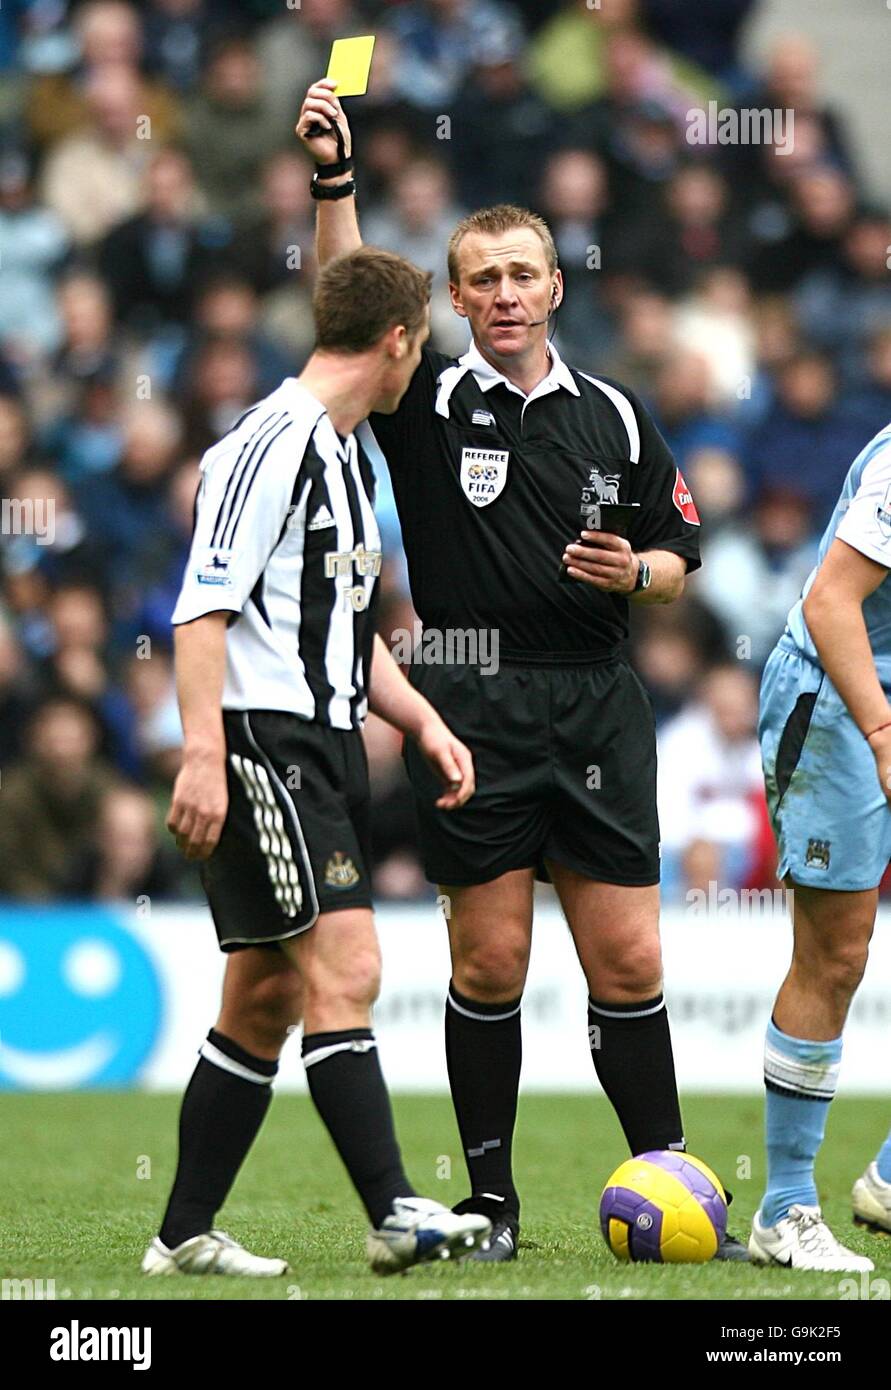 Fußball - FA Barclays Premiership - Manchester City gegen Newcastle United - The City of Manchester Stadium Stockfoto